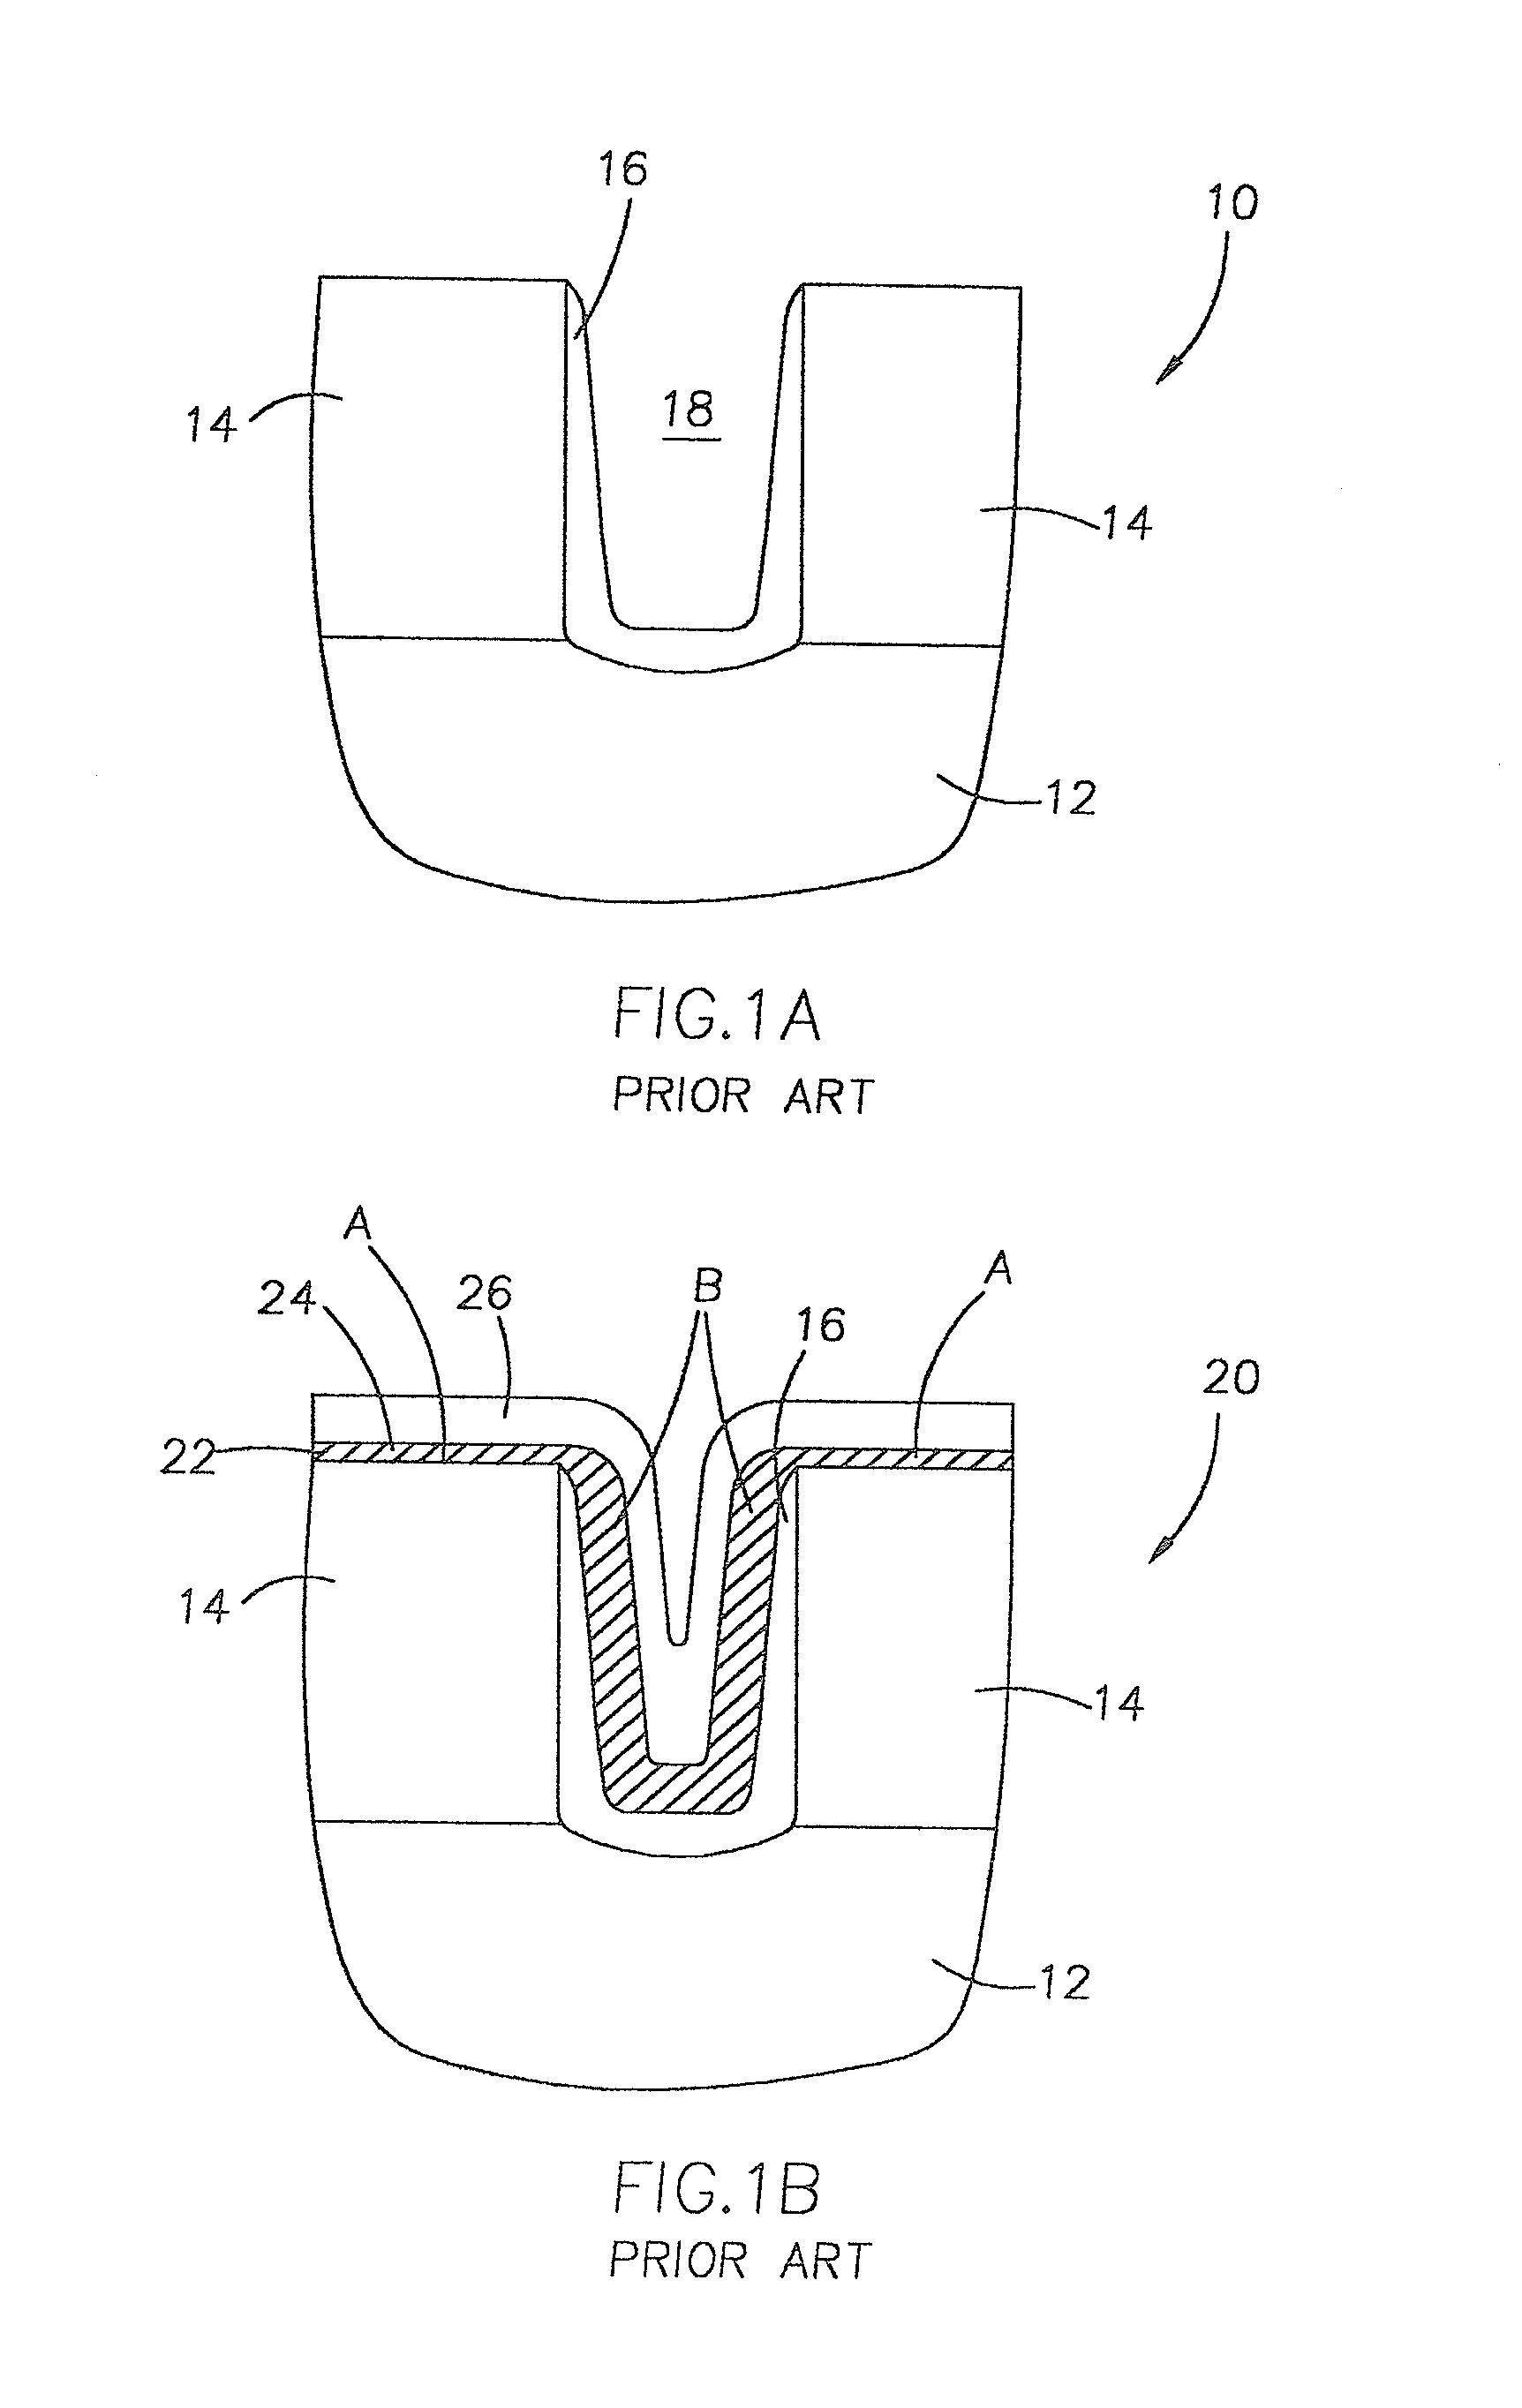 Ultra thin TCS (SiCl4) cell nitride for DRAM capacitor with DCS (SiH2Cl2) interface seeding layer